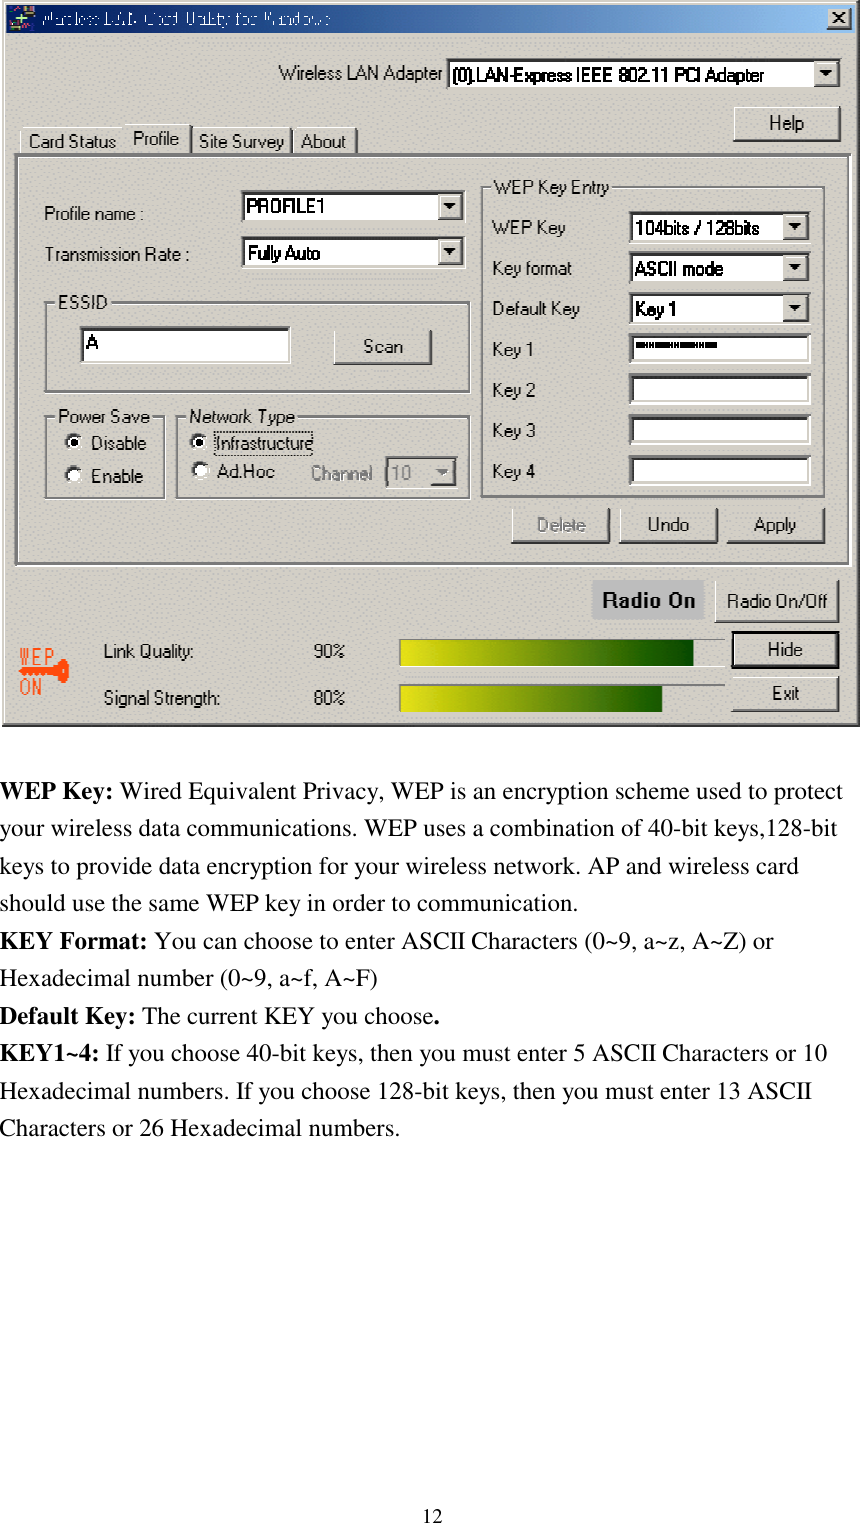 12WEP Key: Wired Equivalent Privacy, WEP is an encryption scheme used to protectyour wireless data communications. WEP uses a combination of 40-bit keys,128-bitkeys to provide data encryption for your wireless network. AP and wireless cardshould use the same WEP key in order to communication.KEY Format: You can choose to enter ASCII Characters (0~9, a~z, A~Z) orHexadecimal number (0~9, a~f, A~F)Default Key: The current KEY you choose.KEY1~4: If you choose 40-bit keys, then you must enter 5 ASCII Characters or 10Hexadecimal numbers. If you choose 128-bit keys, then you must enter 13 ASCIICharacters or 26 Hexadecimal numbers.